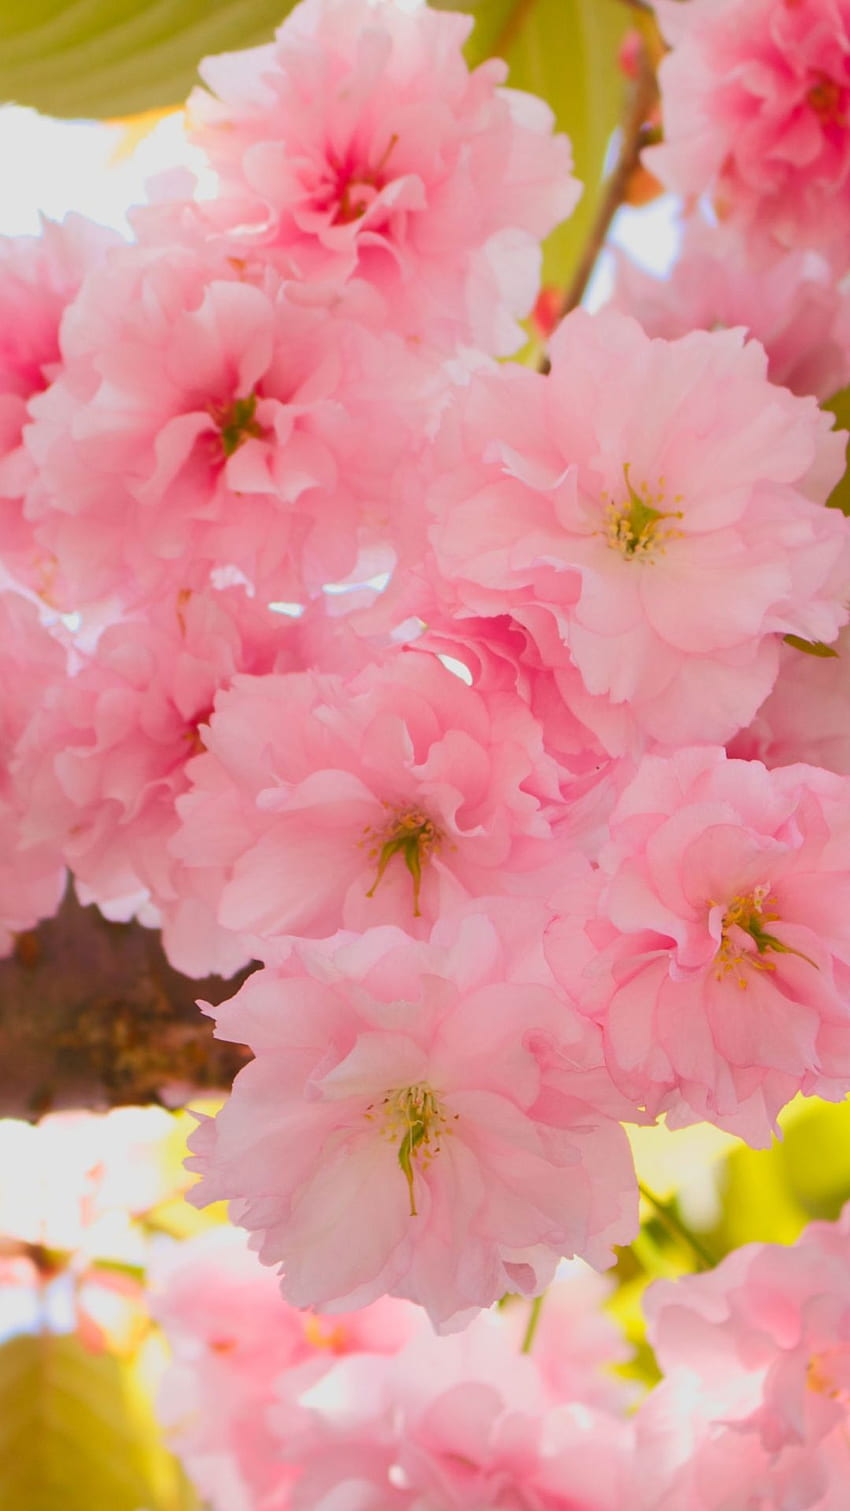 Cherry Blossom Pink Flowers Trees Branches Blur Background 4K HD Flowers  Wallpapers  HD Wallpapers  ID 115321